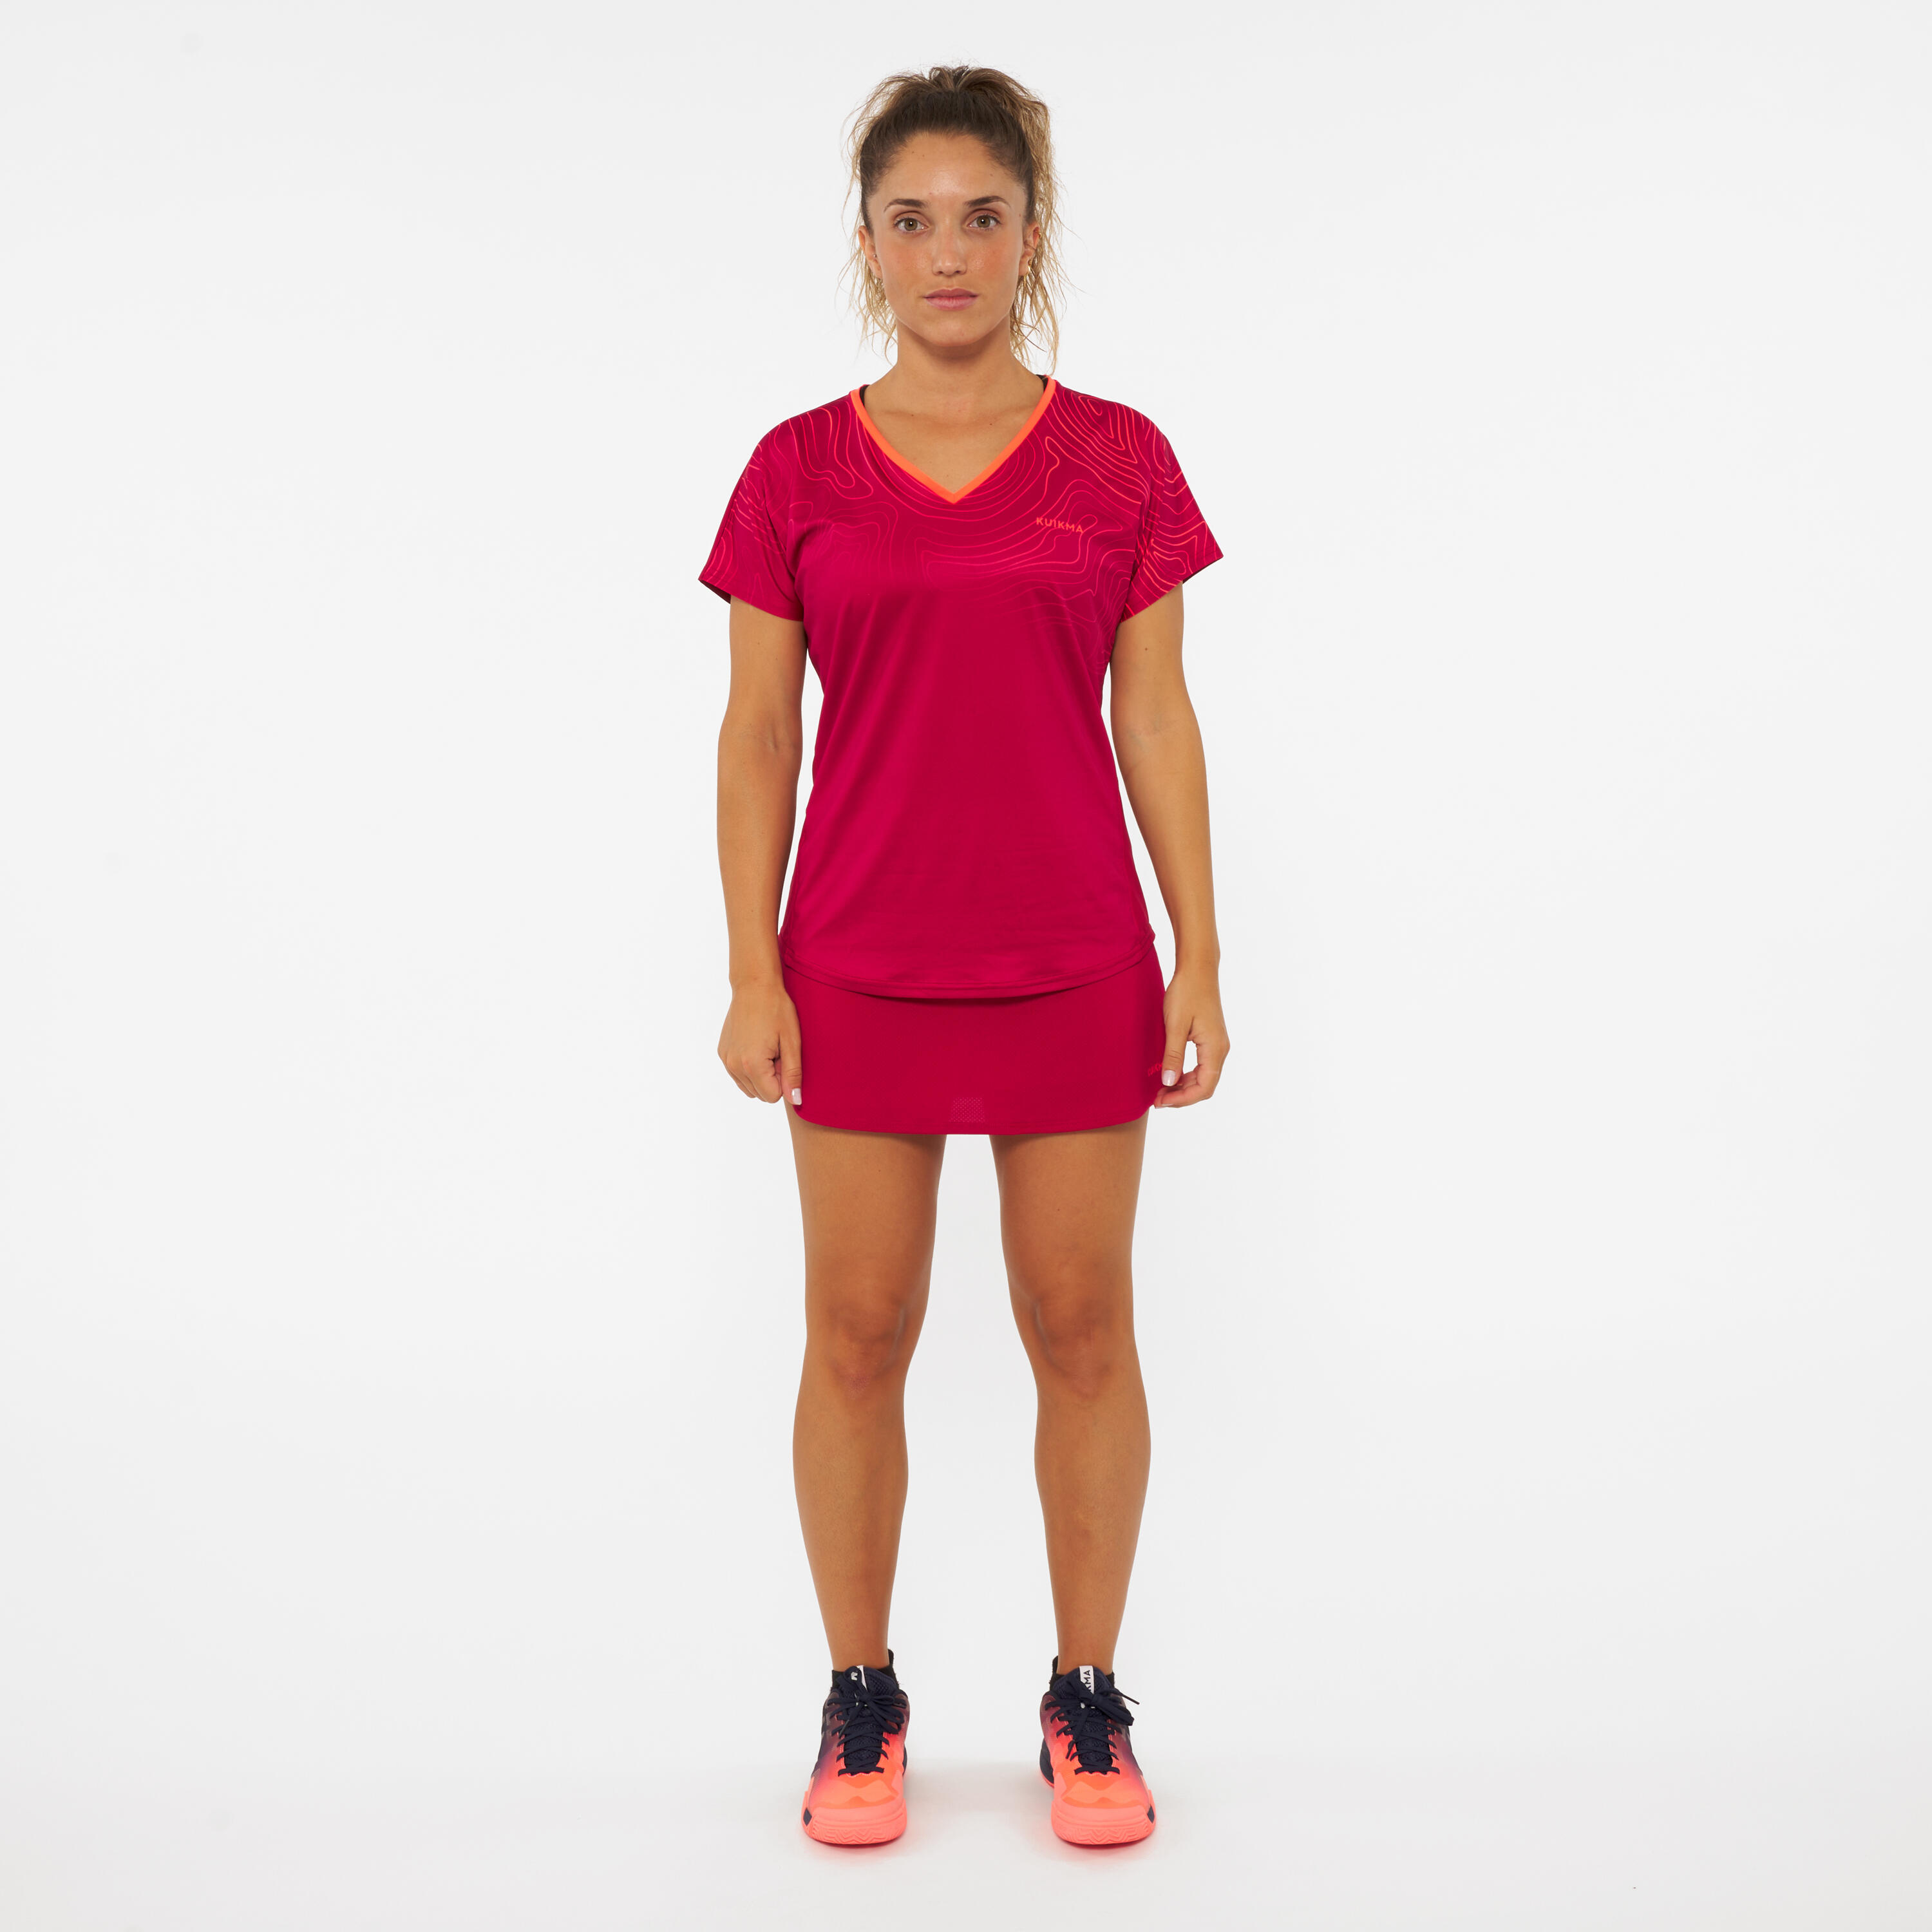 Women's Breathable Short-Sleeved Padel T-Shirt 500 - Red 2/7